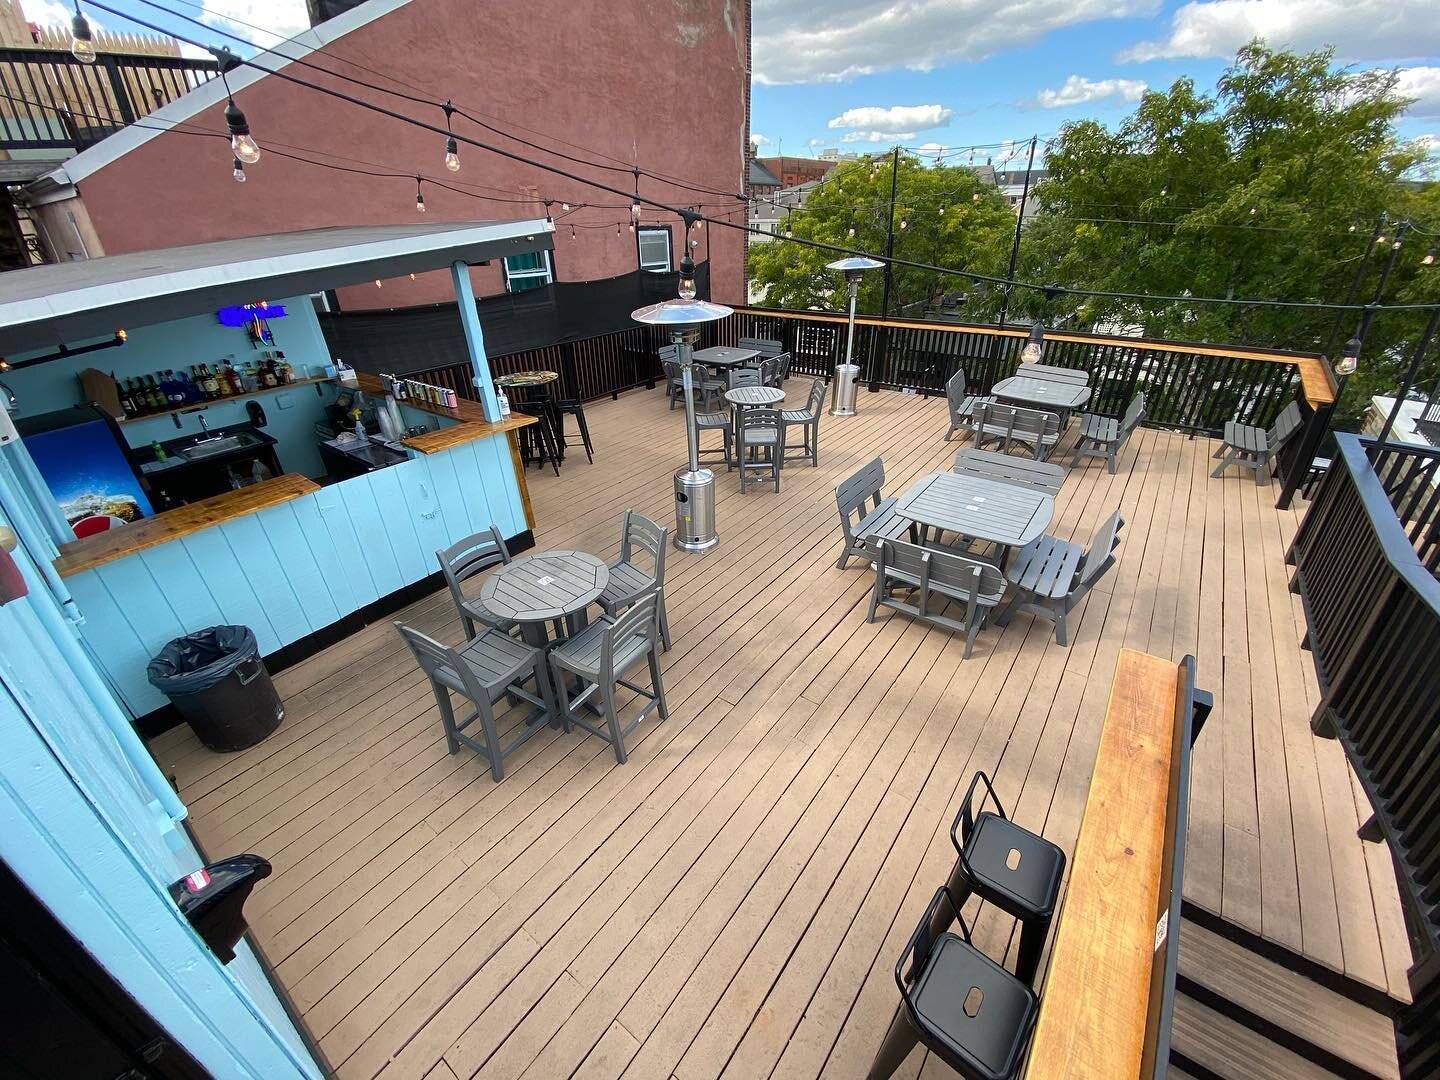 Roof deck is open and #secondsummer is underway!!!! Enjoy it while you can! ................#playarcade #itsallfunandgames